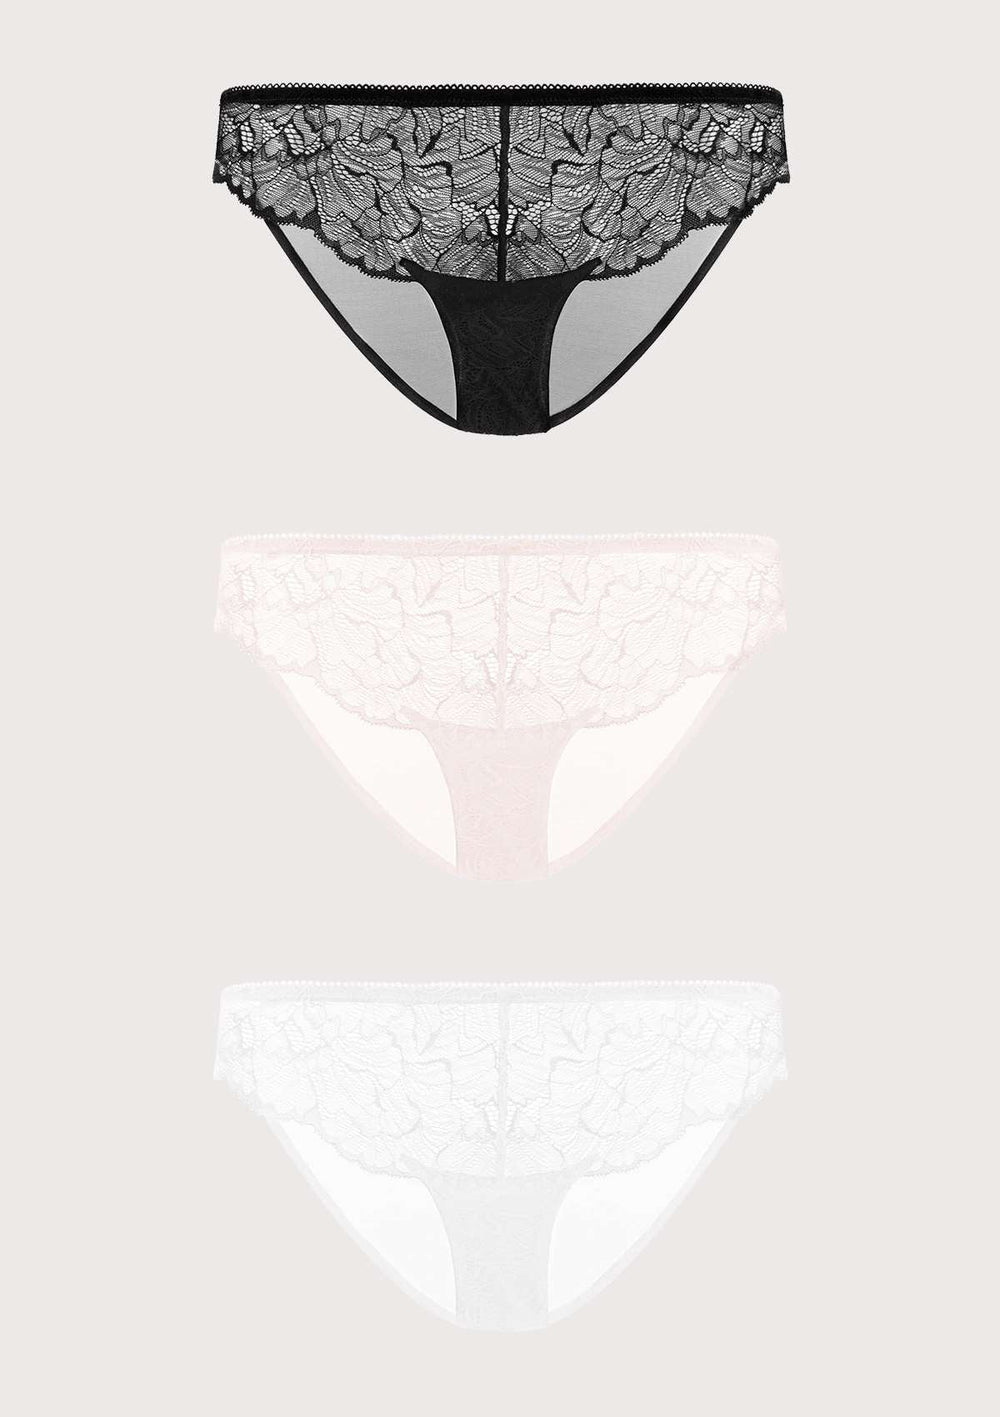 HSIA Blossom Unlined Biscay Blue Lace Bra Set